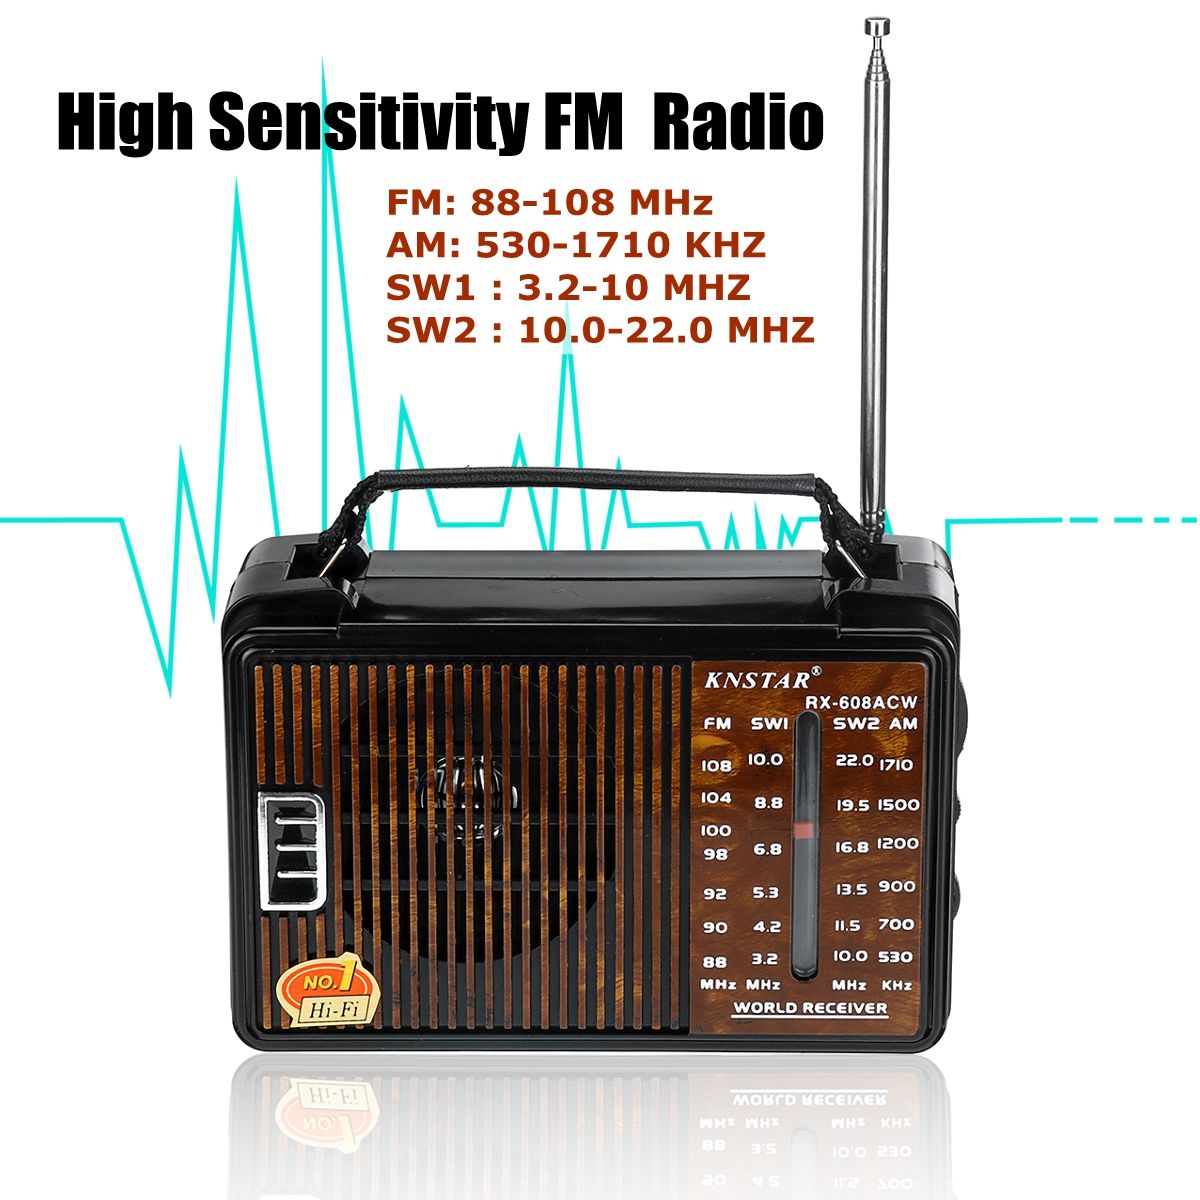 RX-608AC-DC-3V-Portable-FM-AM-SW1-SW2-Radio-4-Band-Radio-Gift-for-Old-People-1566469